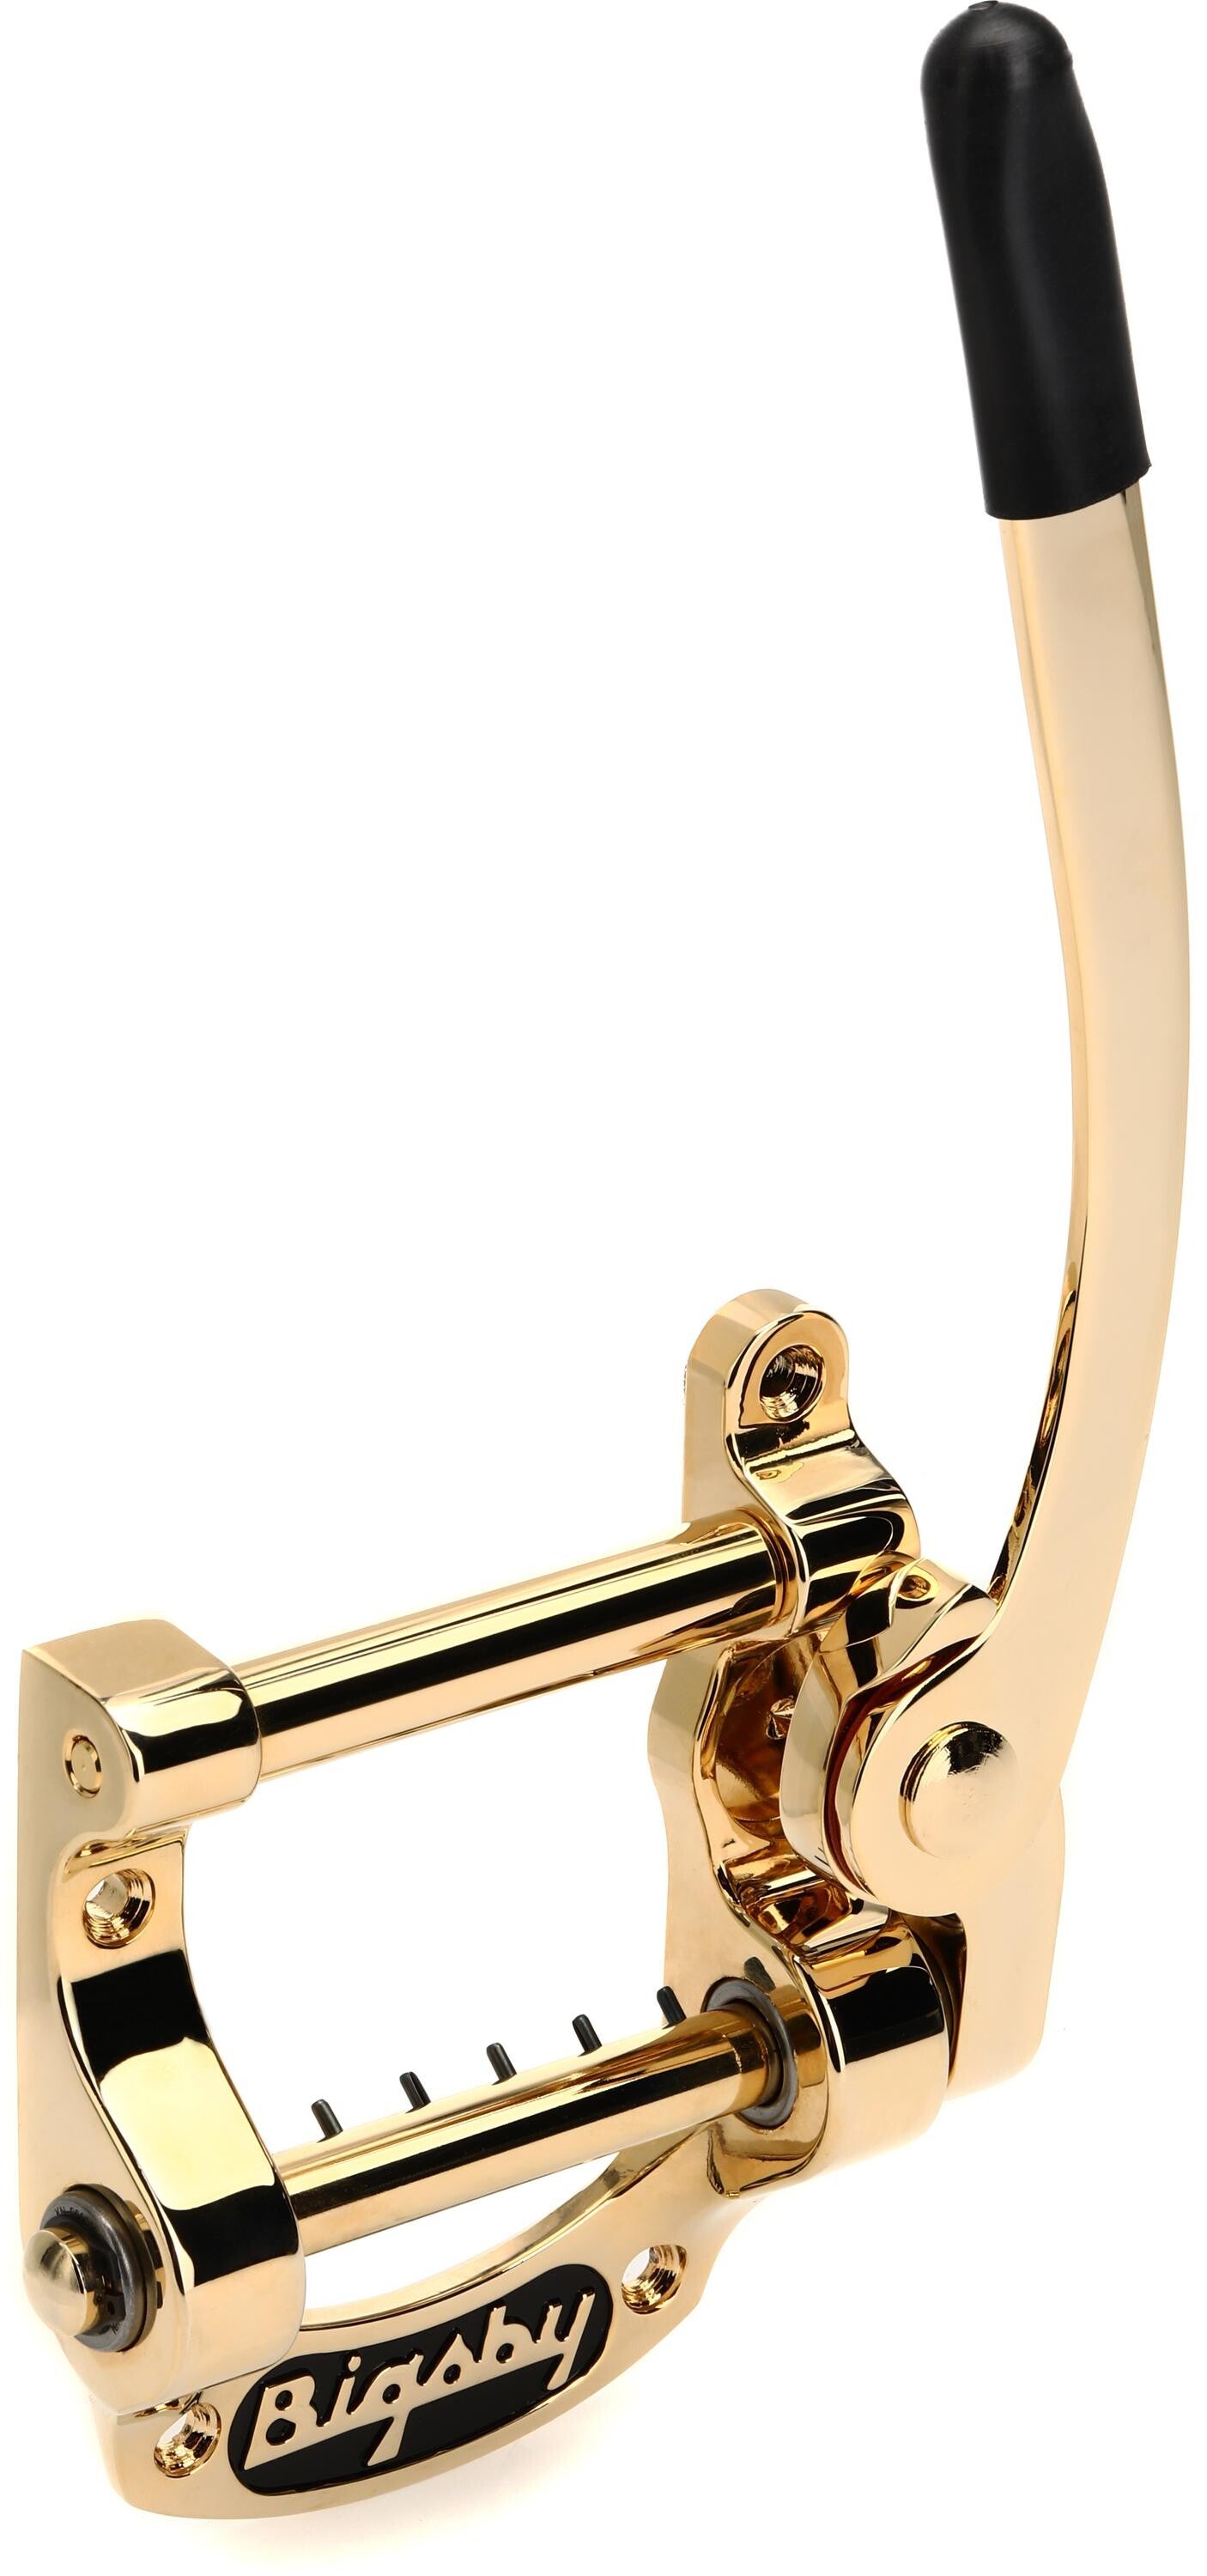 Bigsby B5 Vibrato Tailpiece Assembly - Gold | Sweetwater